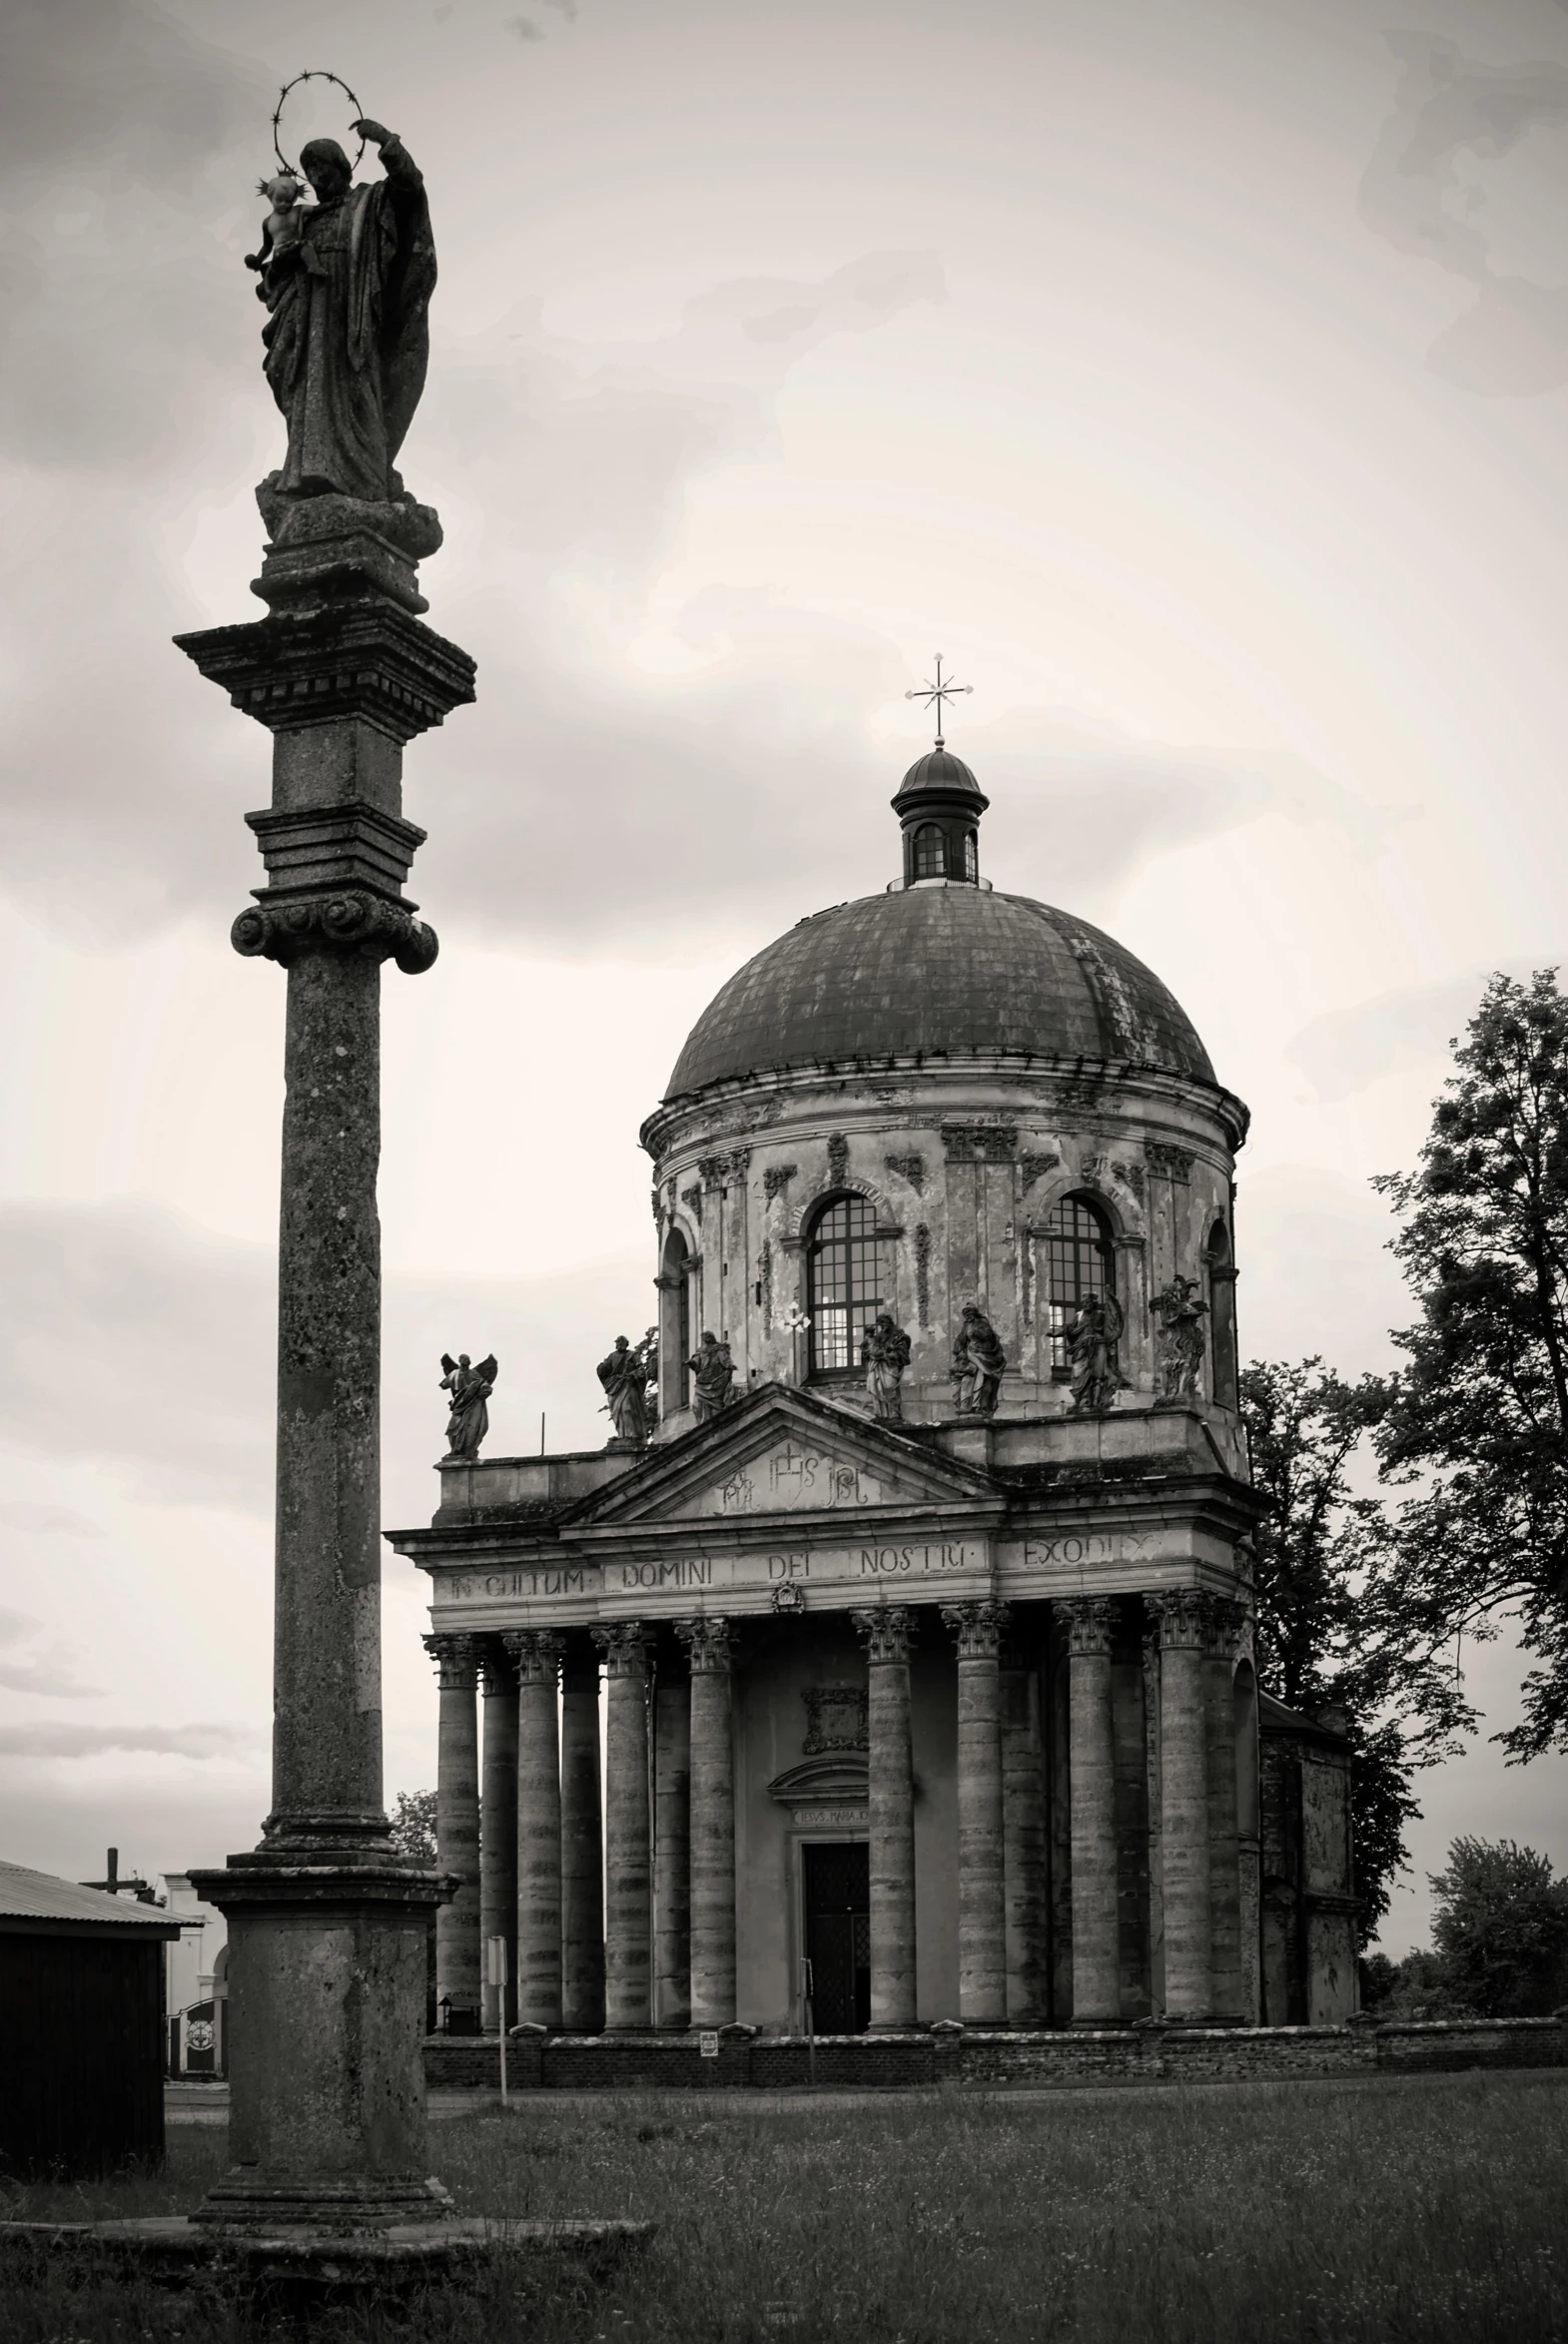 a black and white photo of a statue in front of a building, inspired by Hubert Robert, neoclassicism, dome, 2019 trending photo, ukraine. photography, cathedral!!!!!